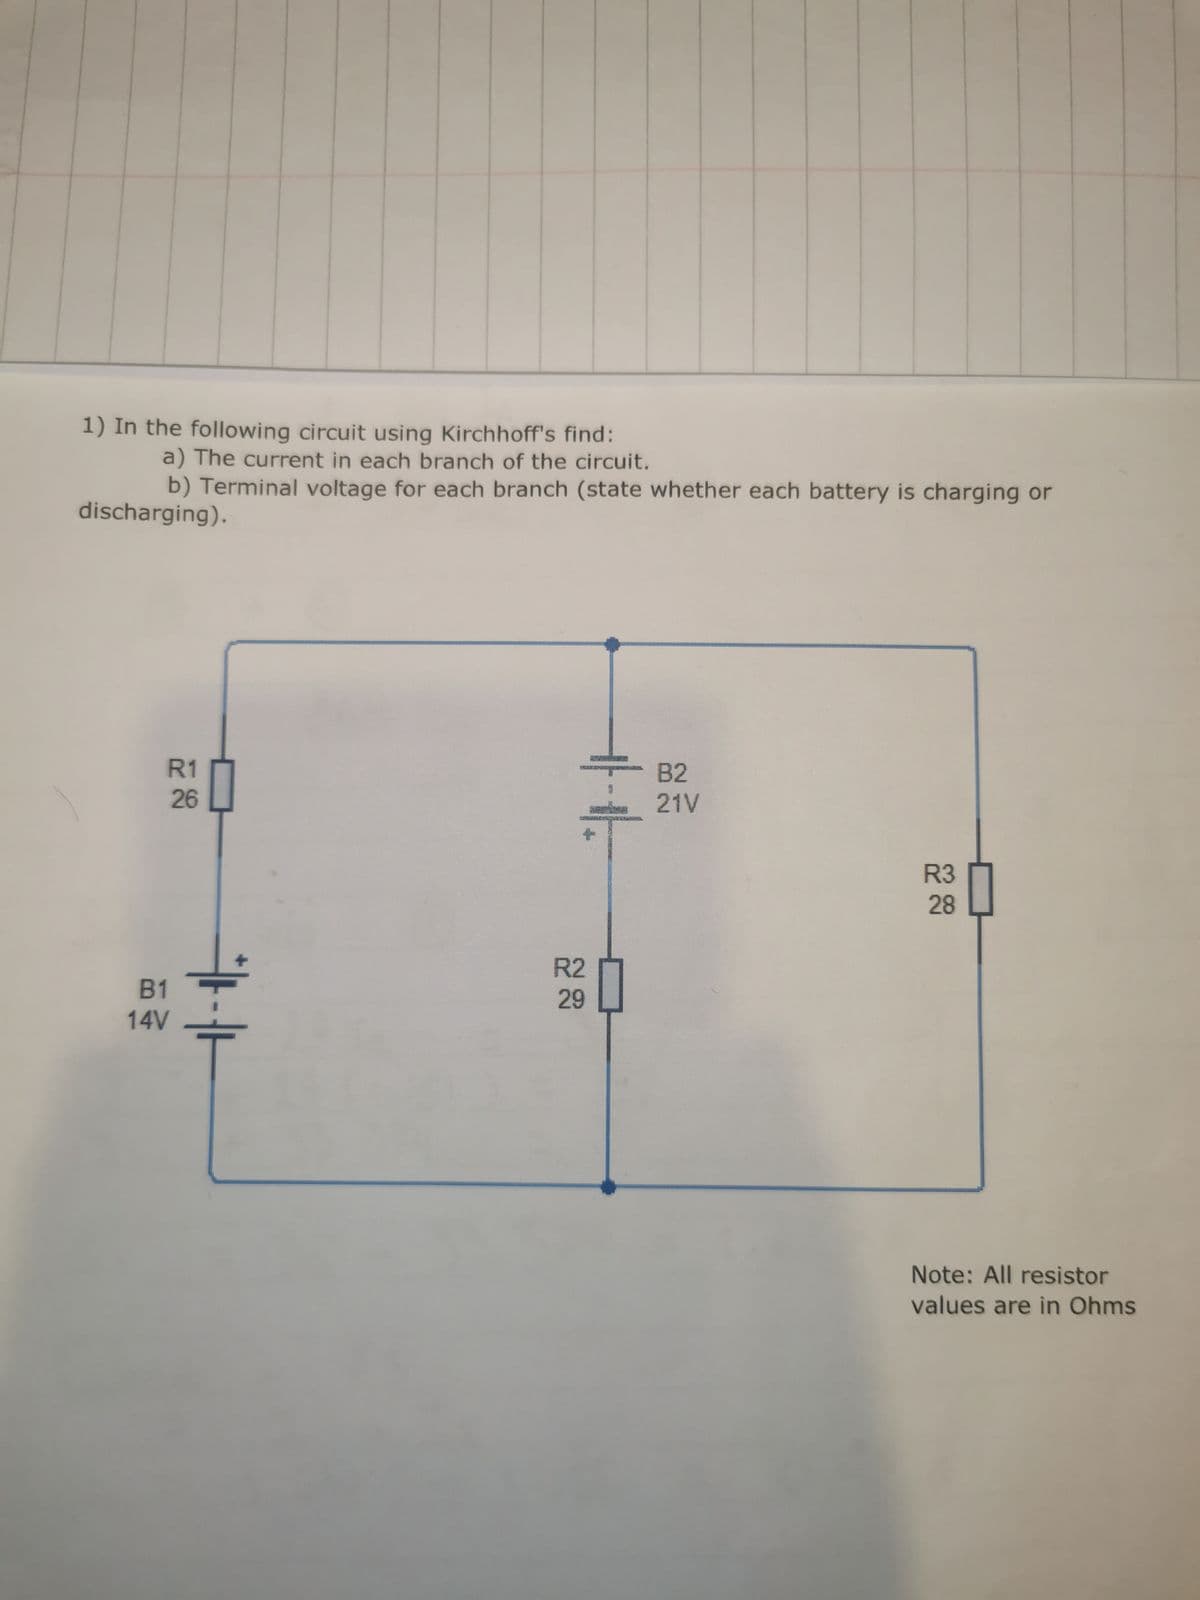 1) In the following circuit using Kirchhoff's find:
a) The current in each branch of the circuit.
b) Terminal voltage for each branch (state whether each battery is charging or
discharging).
R1
26
B1
14V
+
R2
29
B2
21V
R3
28
Note: All resistor
values are in Ohms